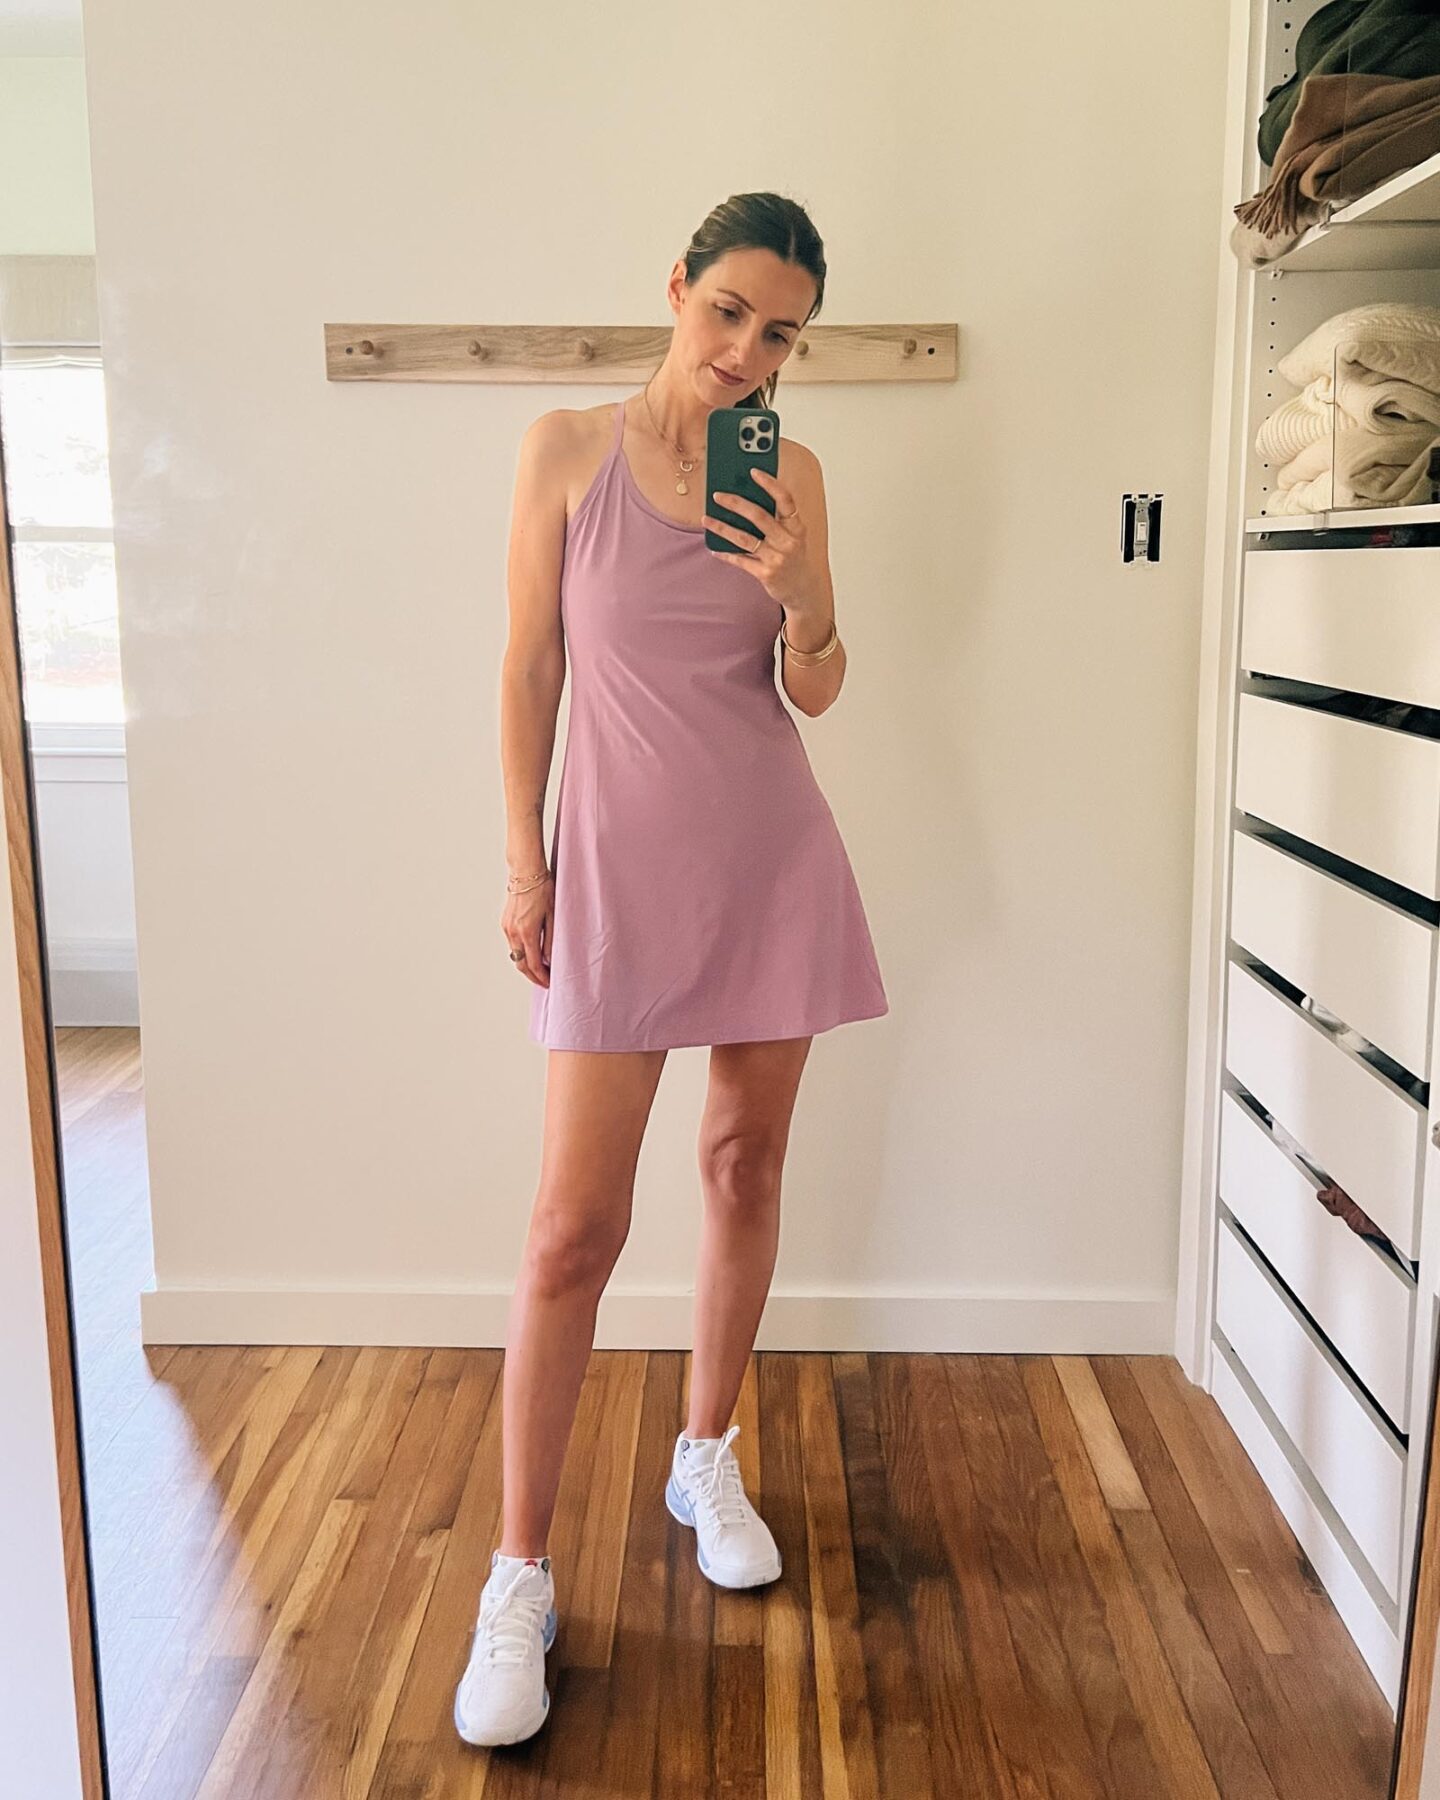 Outdoor Voices Exercise dress for tennis | A Week Of Outfits 5.19.22